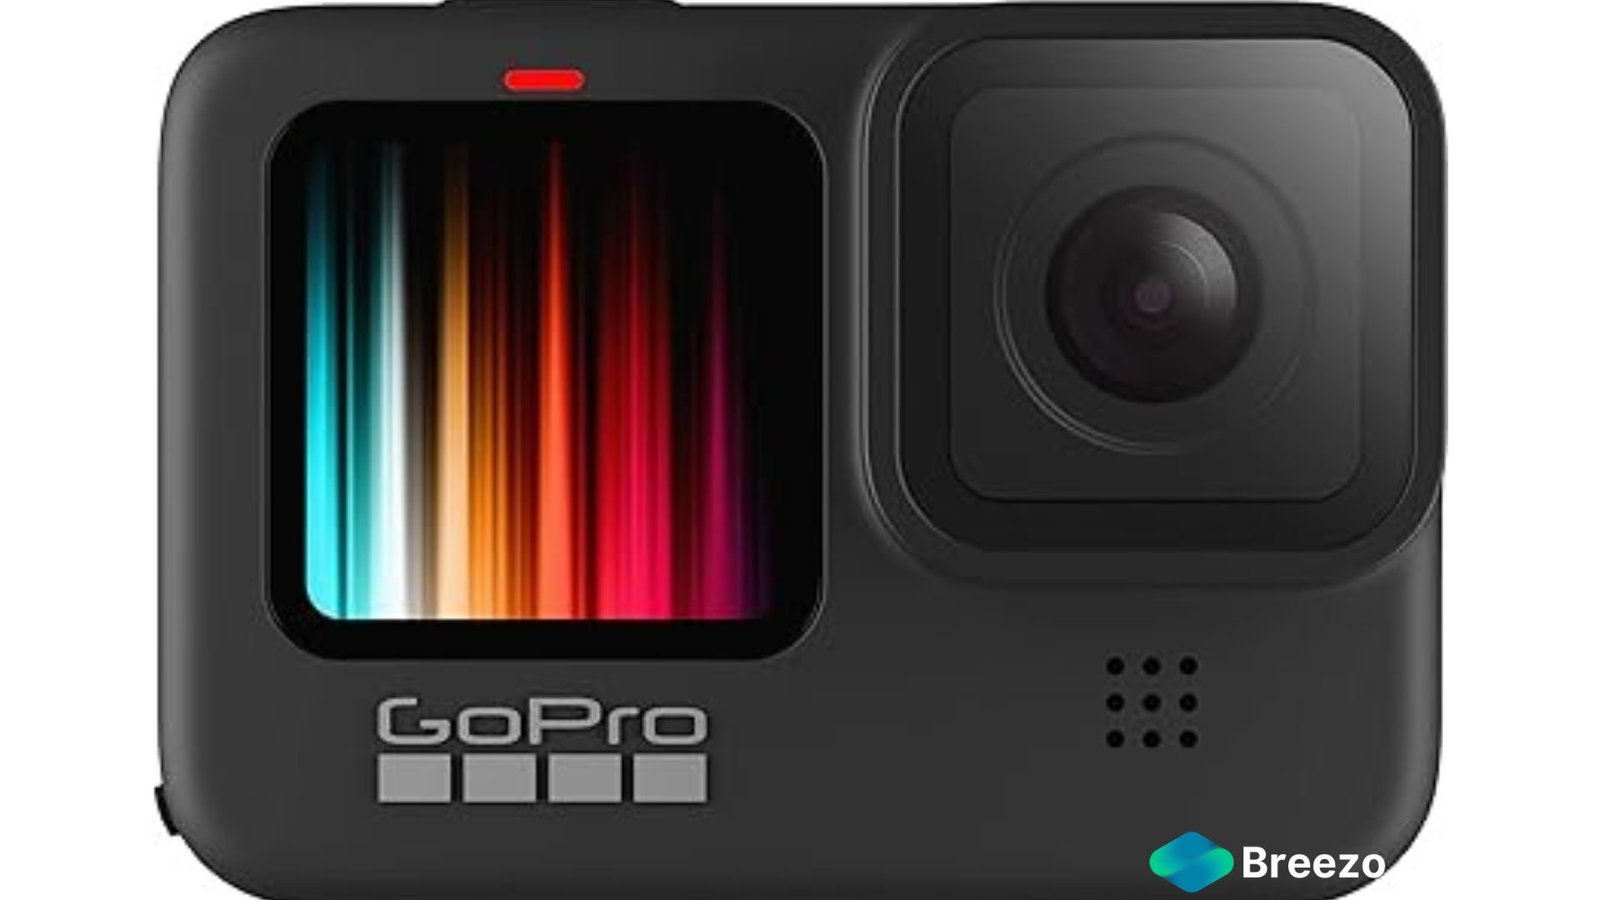 Rent GoPro Hero 9 Camera With All Accessories in Delhi NCR, Camera accessories, Camera lenses for rent, in Delhi Gurgaon Noida, hire Shooting equipment, Lighting equipment rental, Film gear rental for Video production, camera rental company in Delhi, film equipment rental company